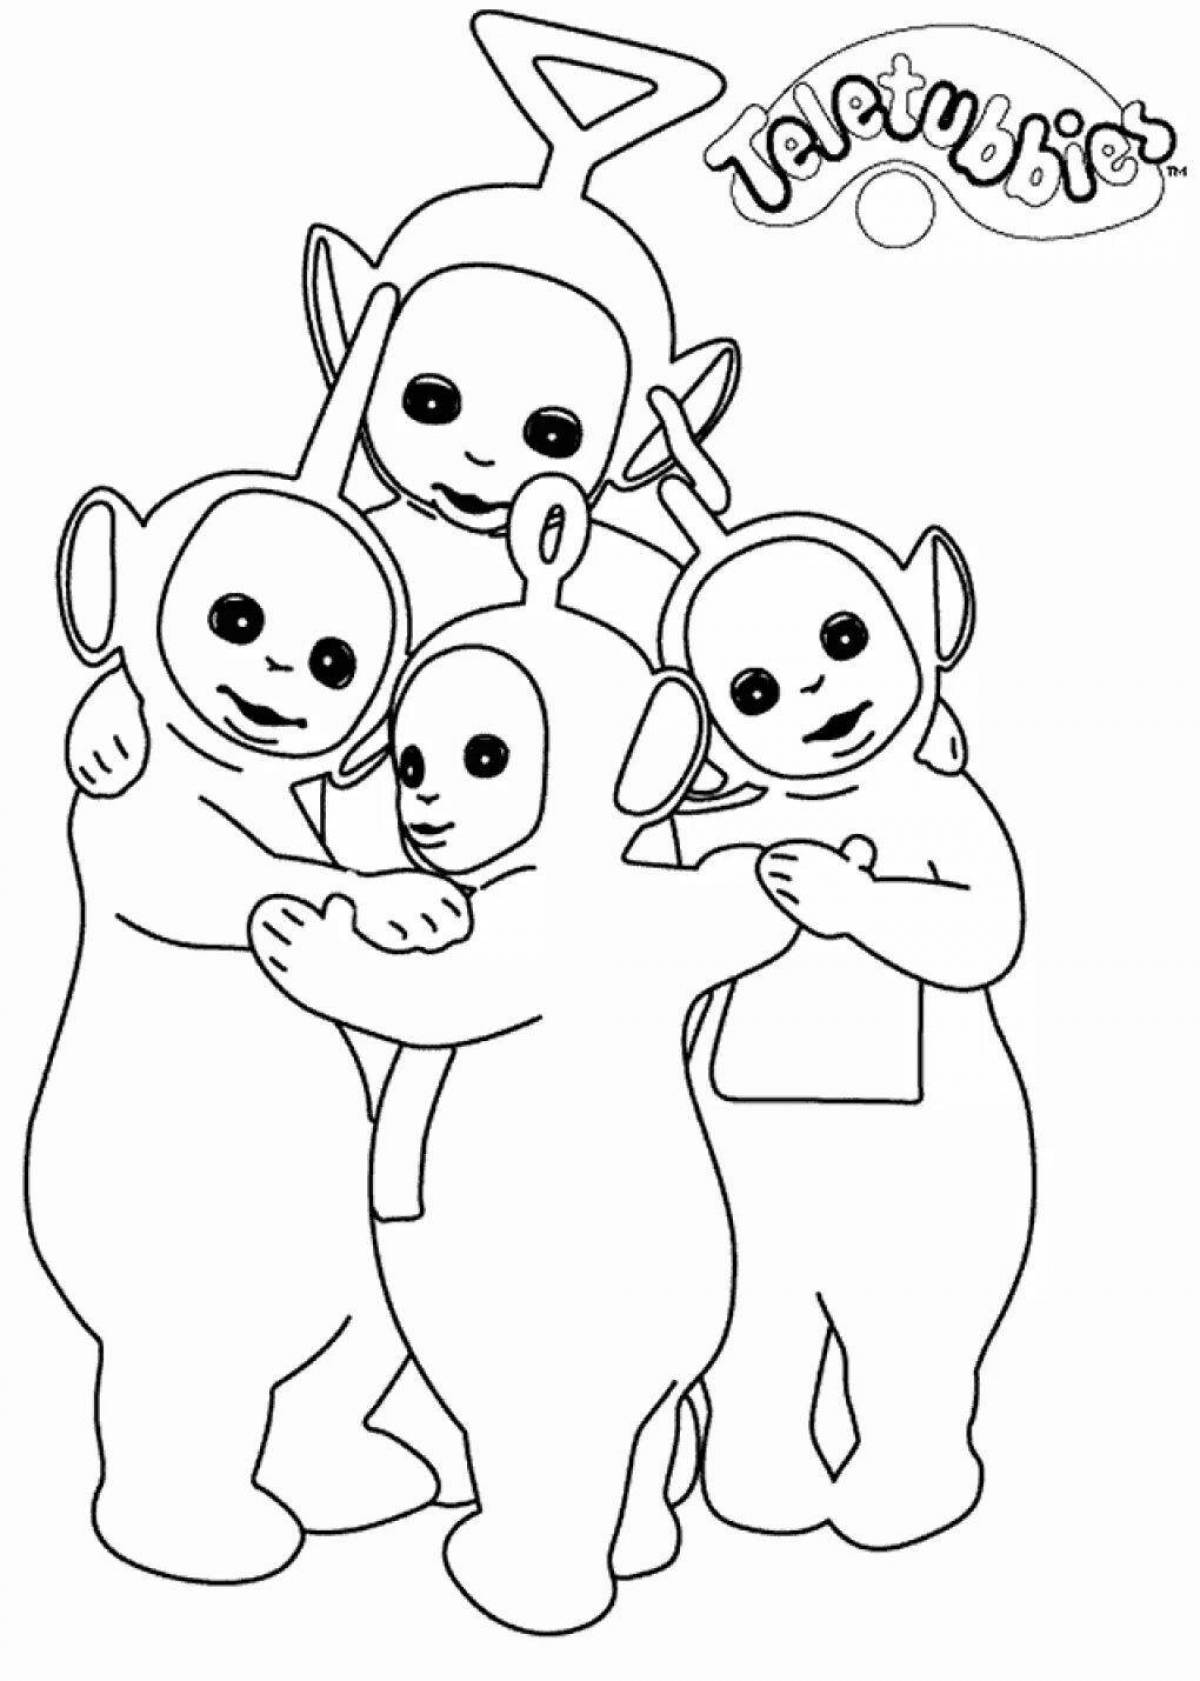 Slender-tubbies bright coloring